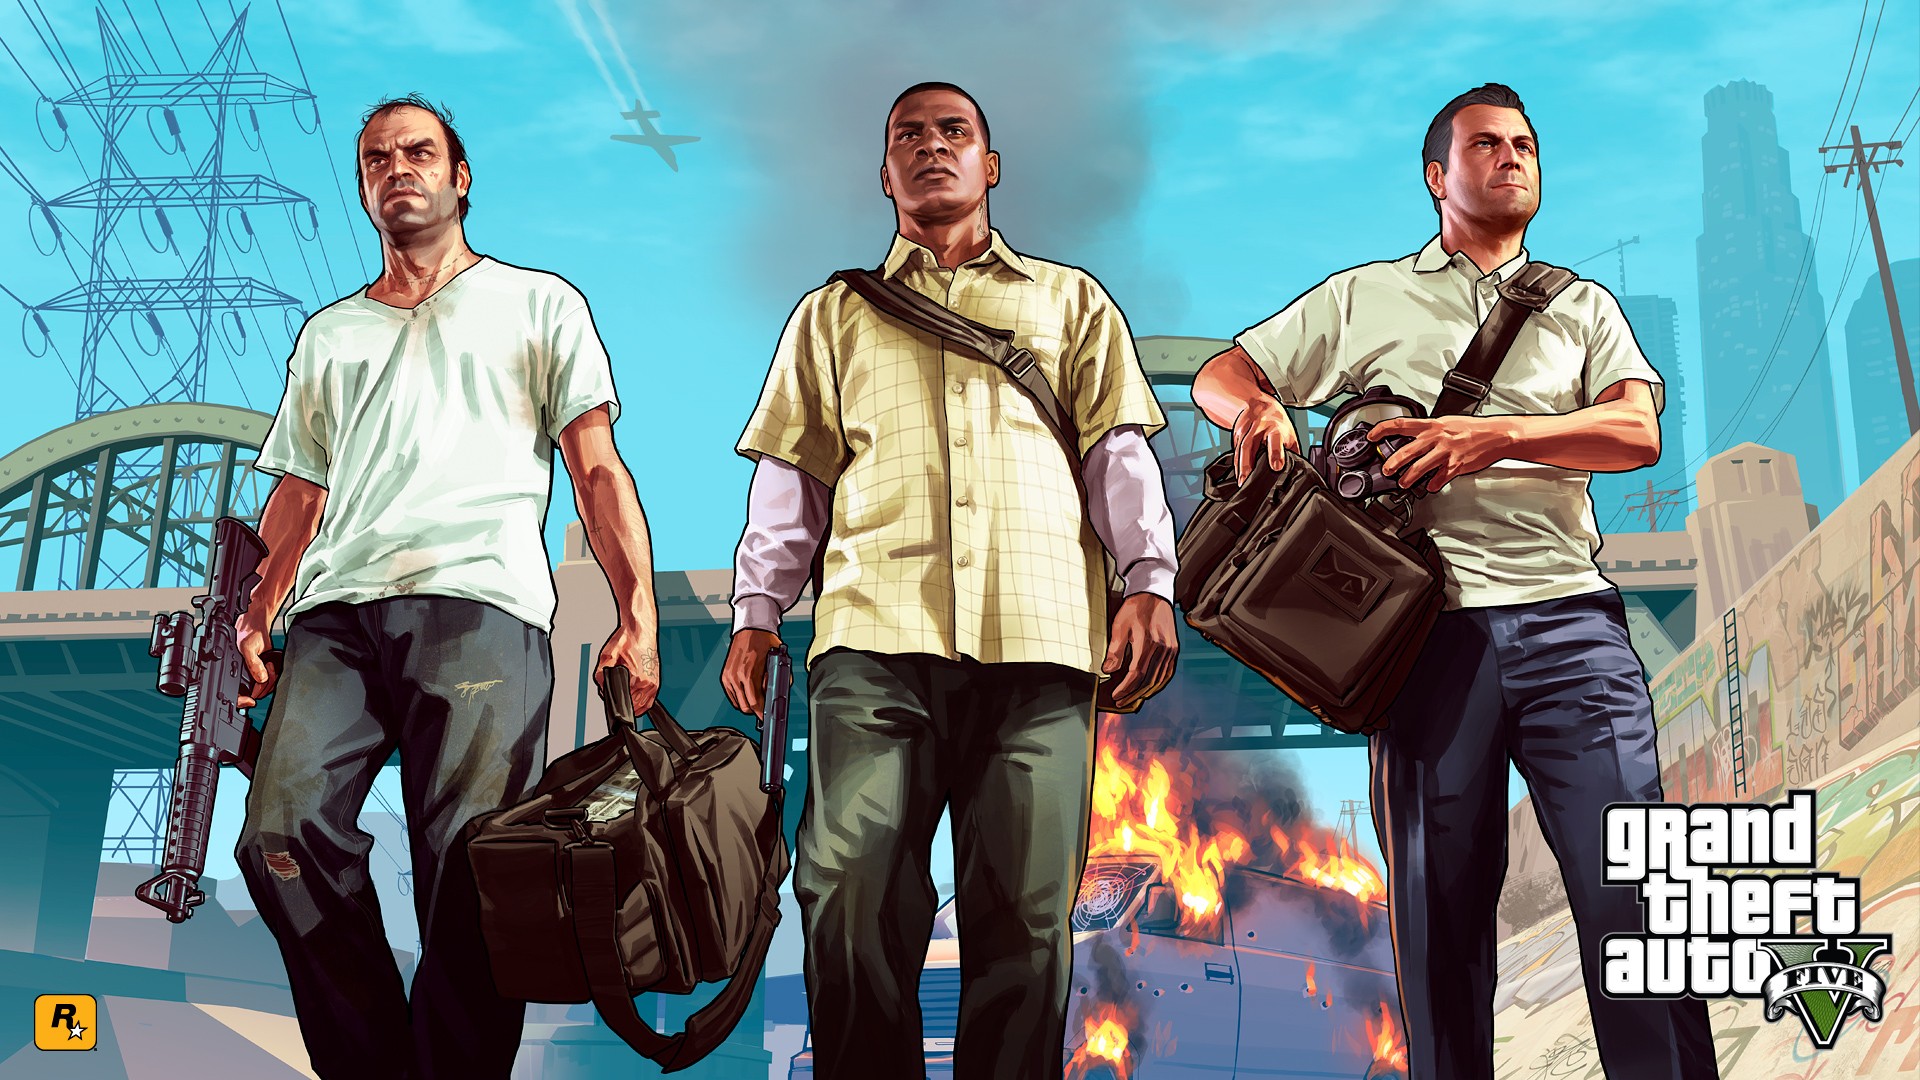 Grand Theft Auto V, Rockstar Games, Video Game Characters Wallpaper